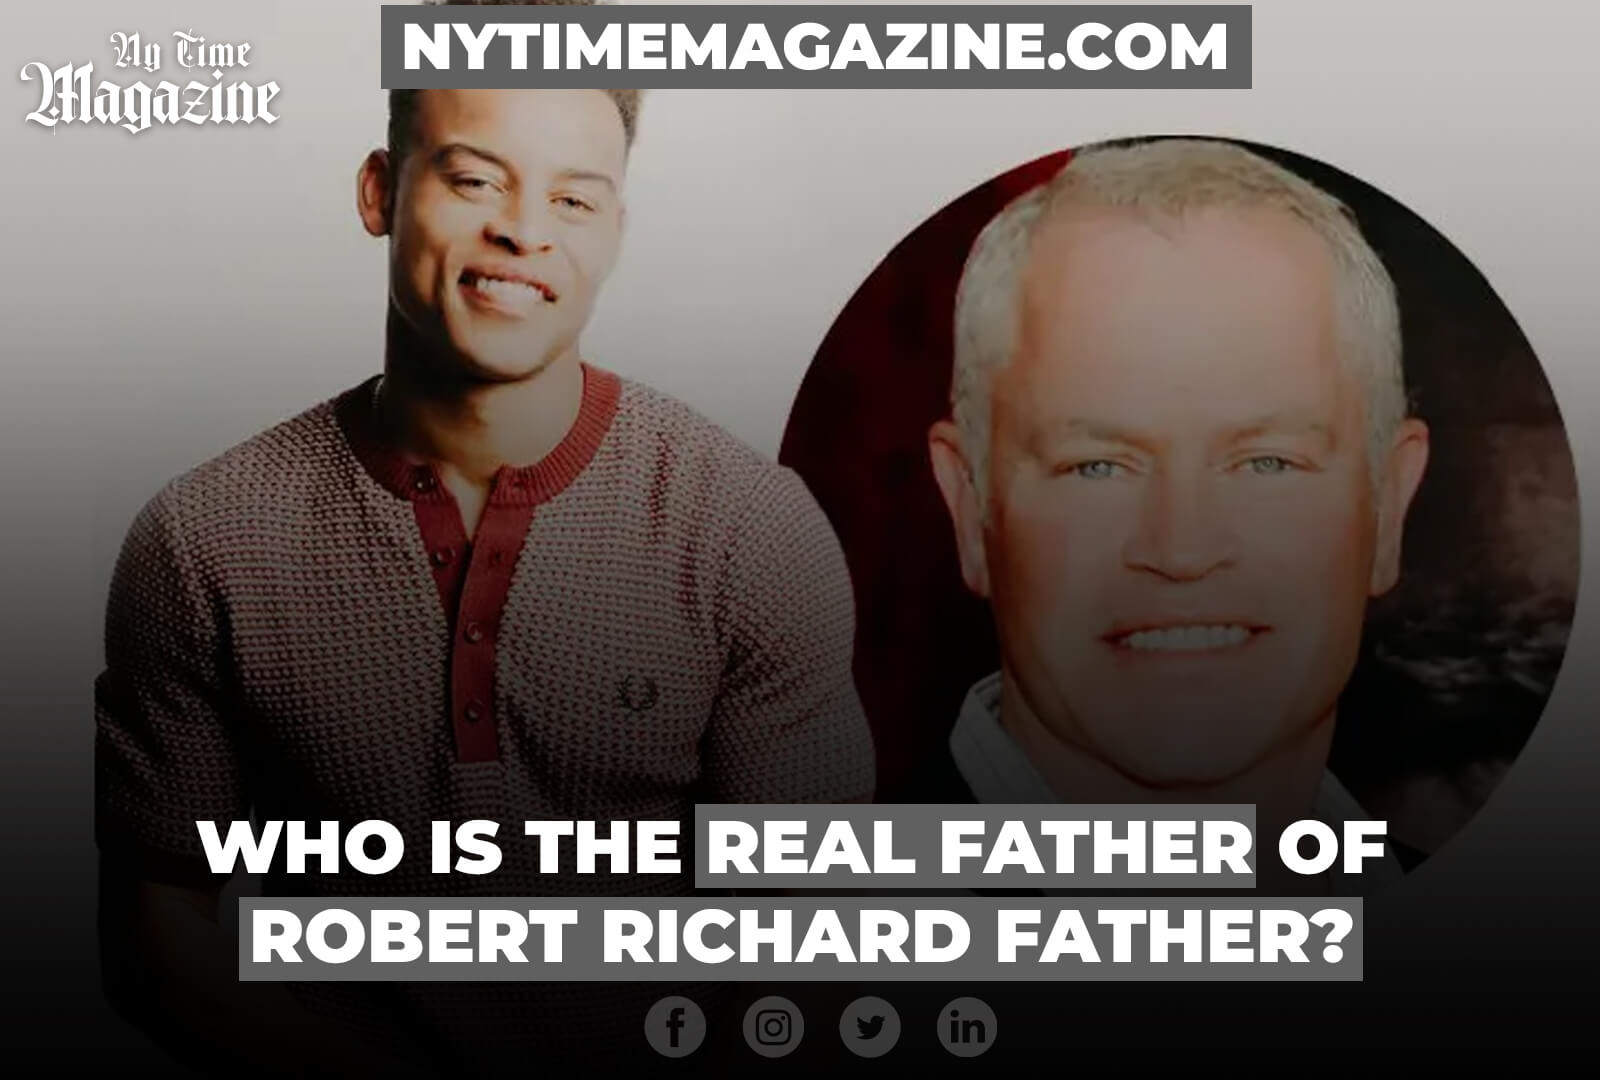 WHO IS THE REAL FATHER OF ROBERT RICHARD FATHER?